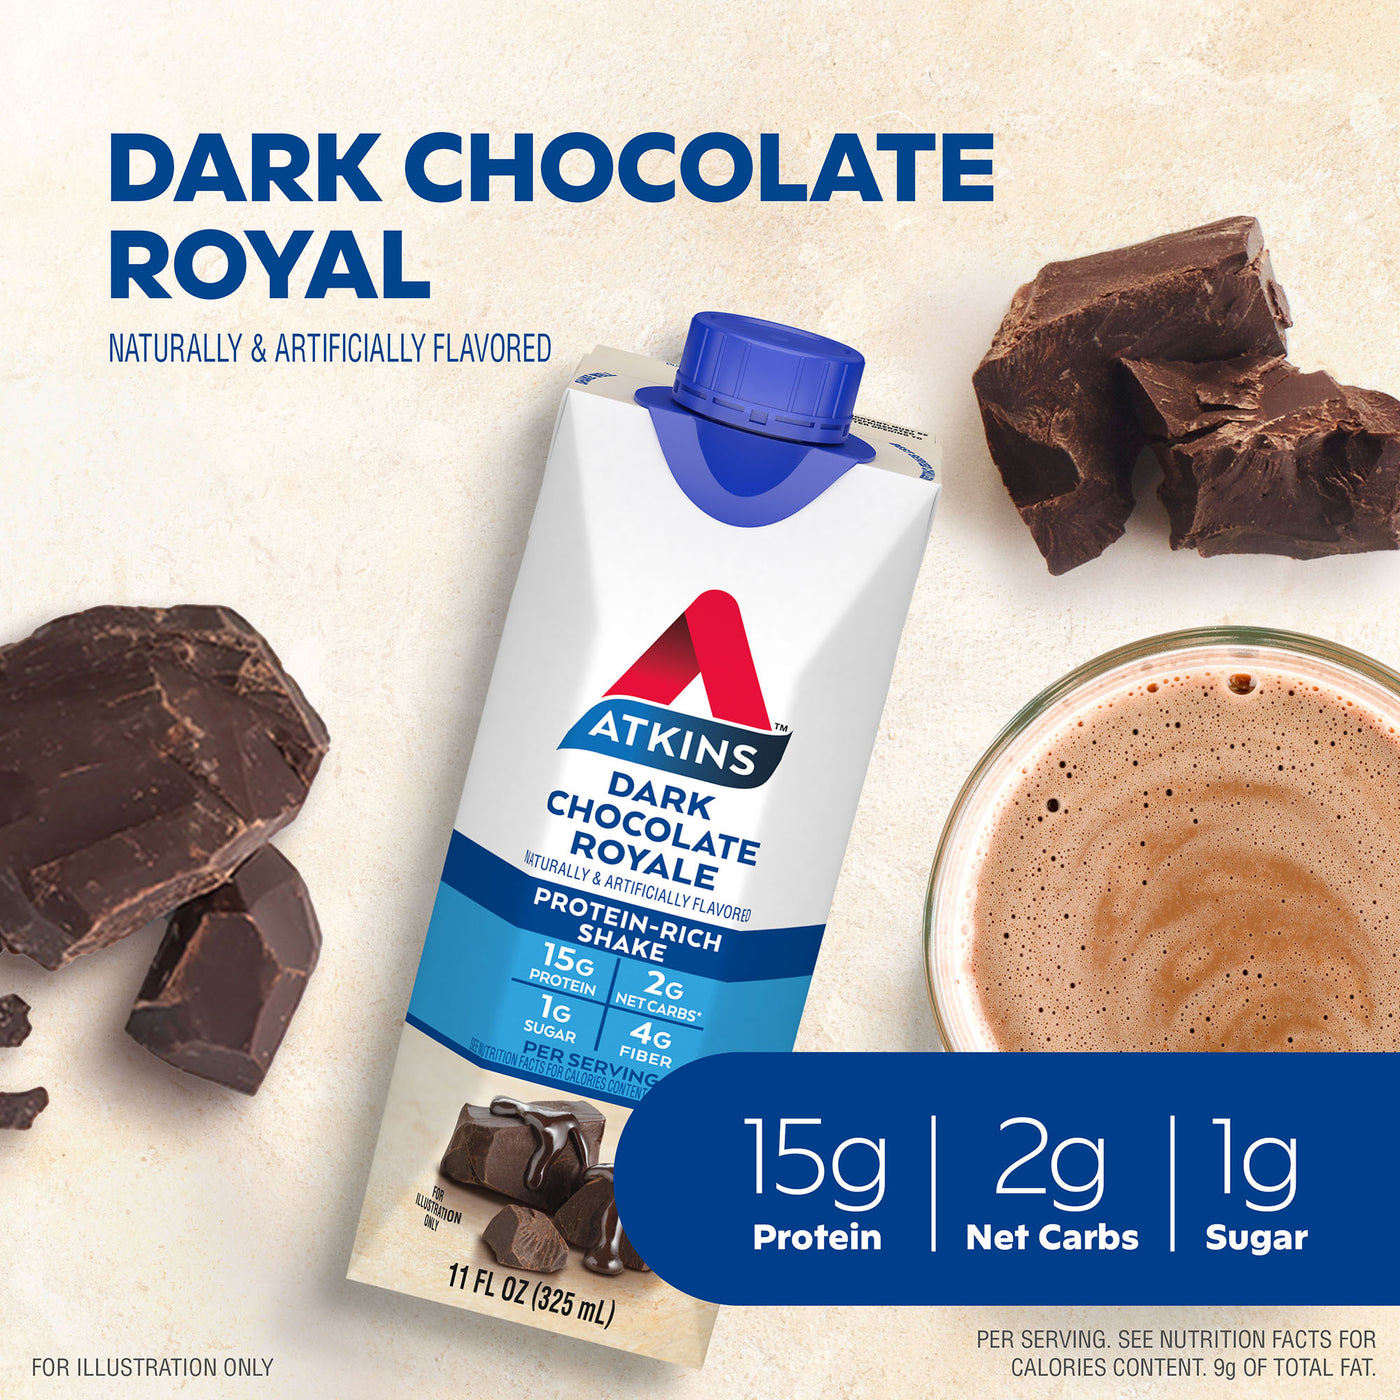 Dark Chocolate Royale naturally & artificially flavored. 2G Net Carbs, 15G Protein, 1G Sugar. *Contain 9G of total fat per serving. See nutrition Facts for calories content.